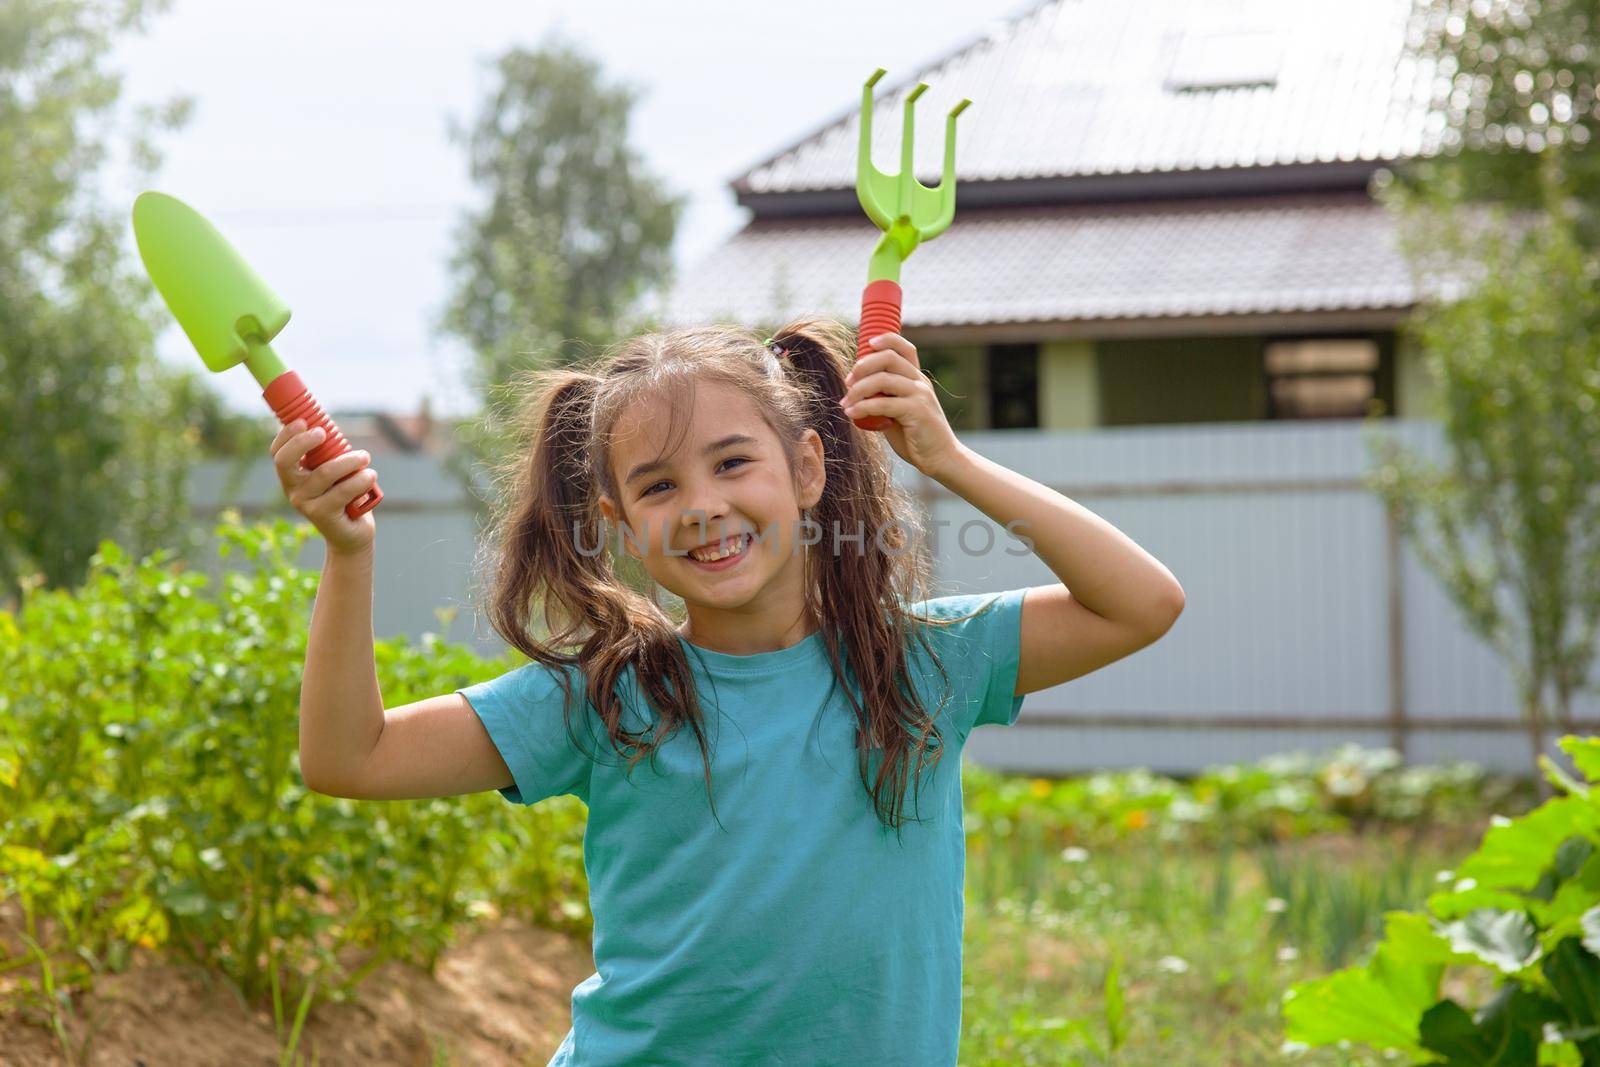 Cute little girl in green t-shirt holding small gardening tools , dancing in the garden on a sunny day. Copy space